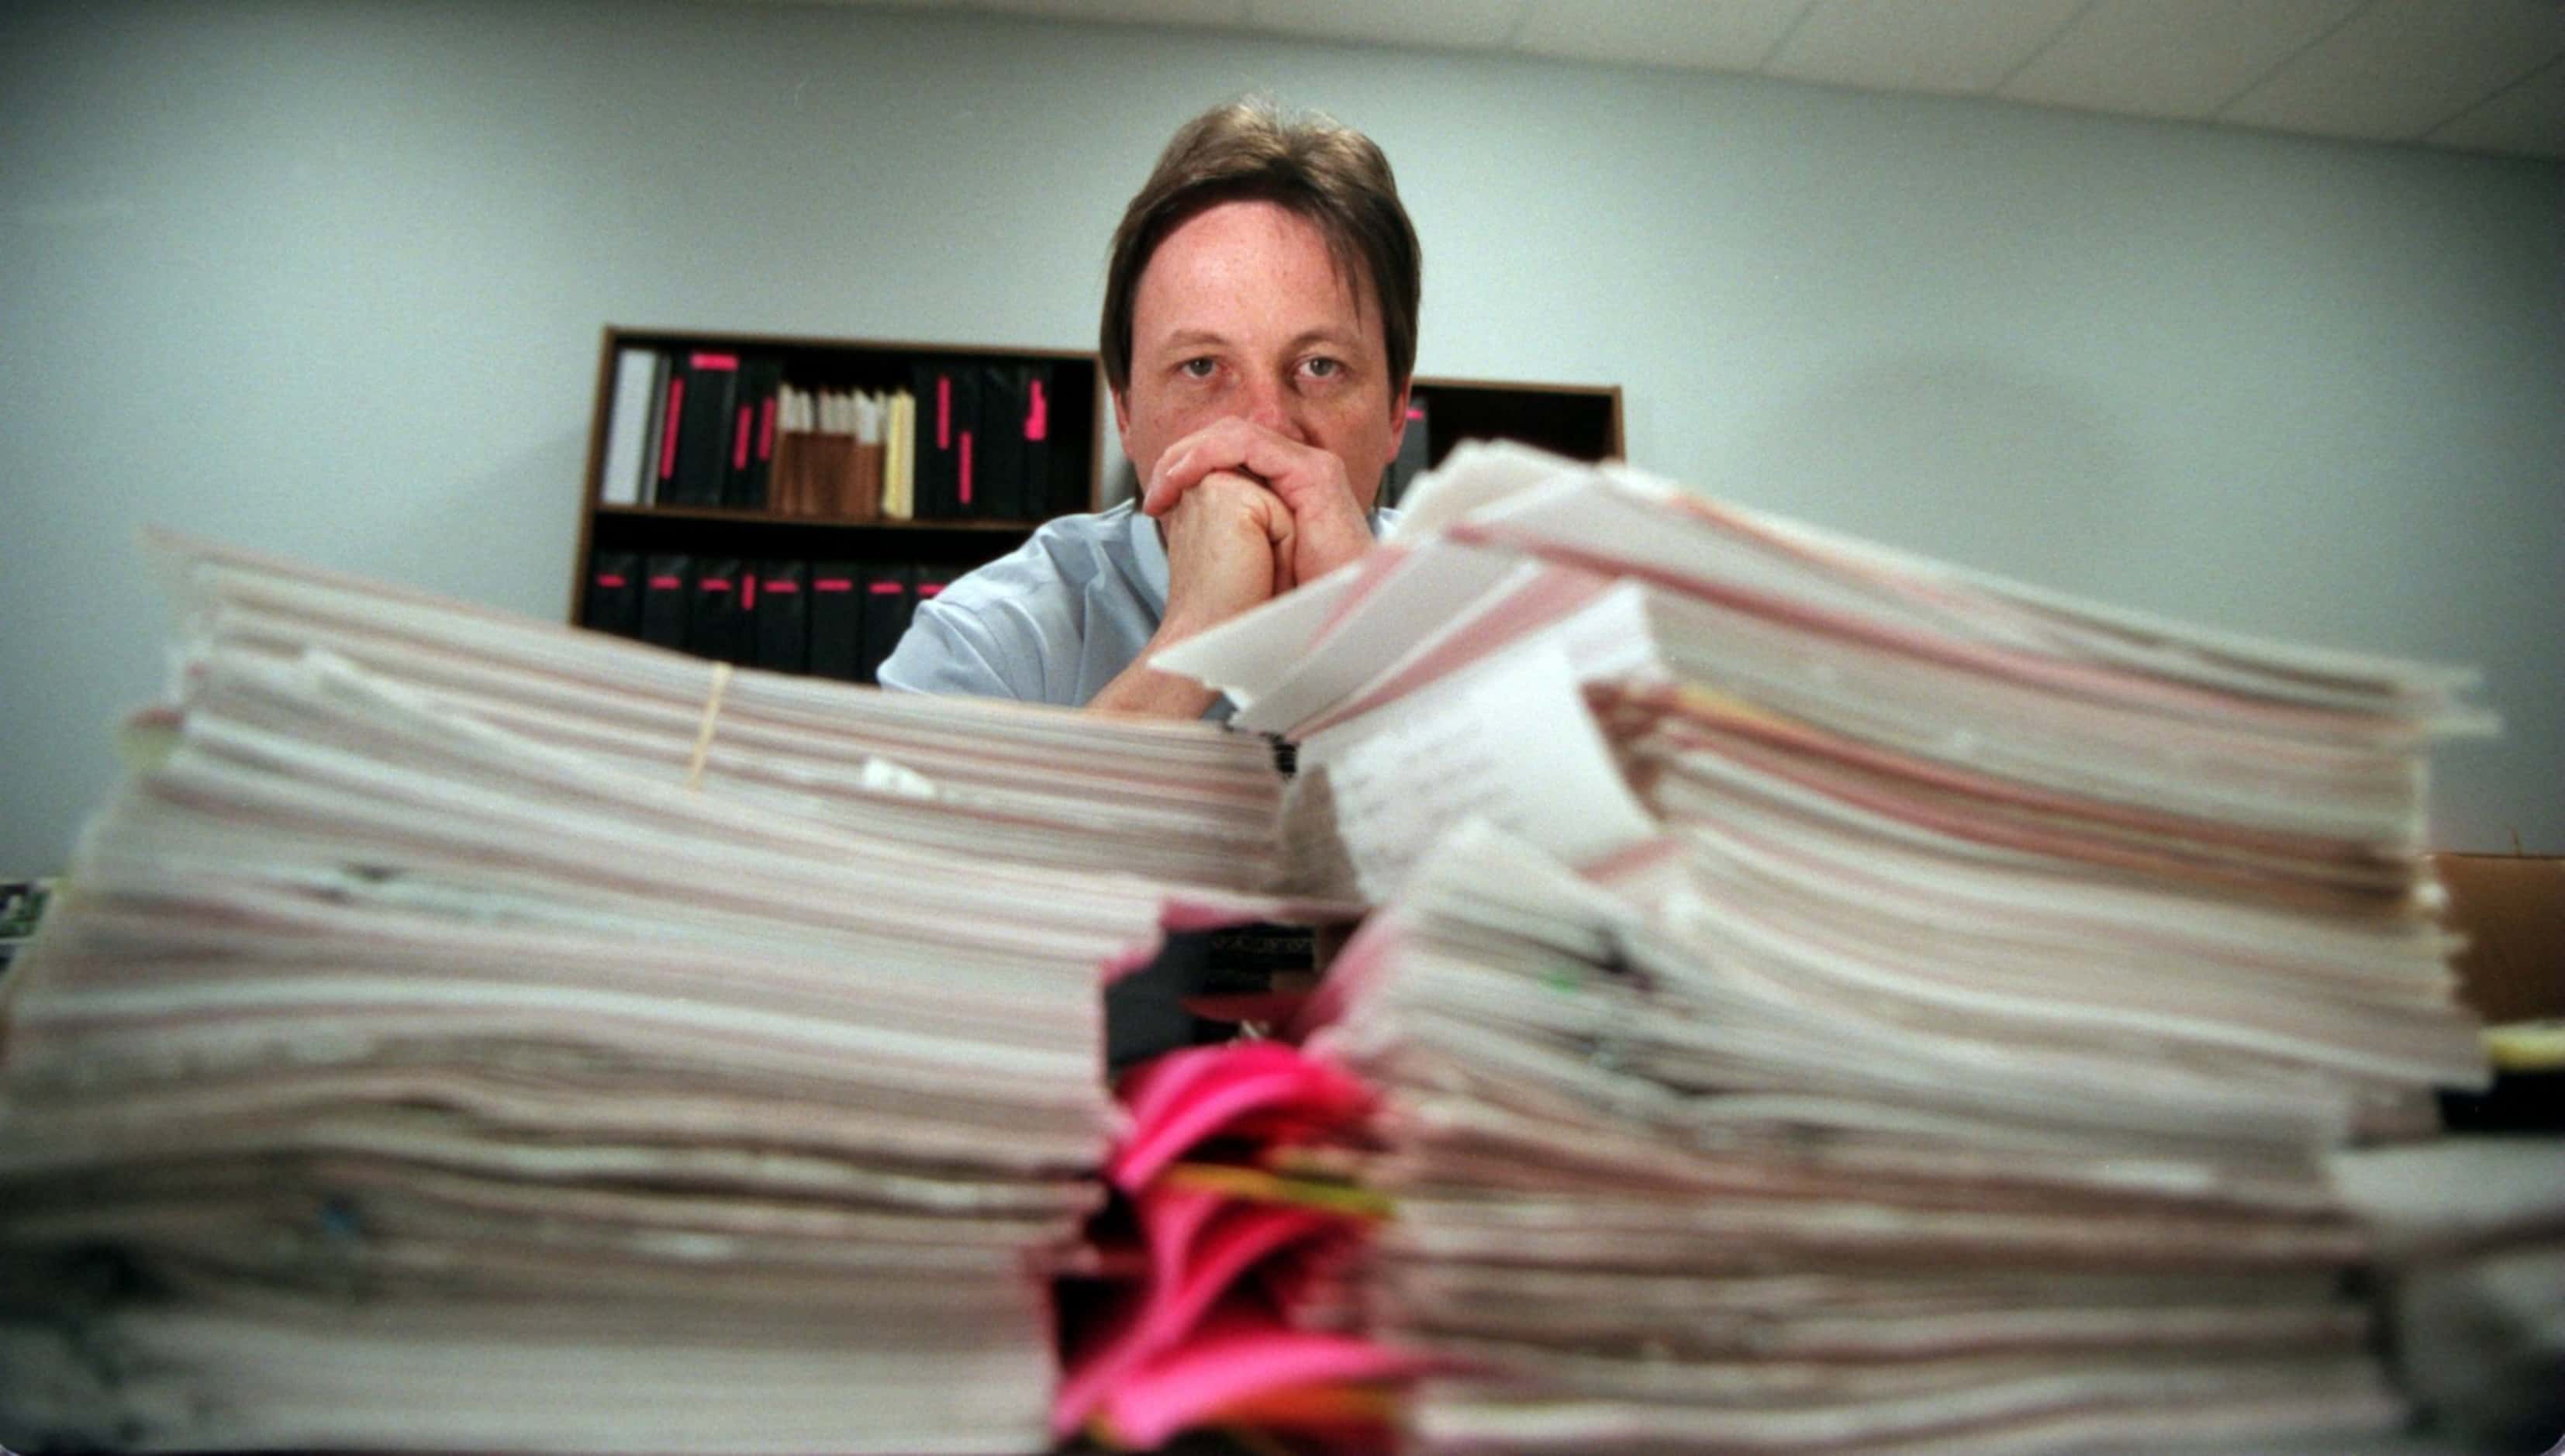 Sgt. Mark Simpson who is head of the Amber Hagerman Task Force sits behind stacks of paper...